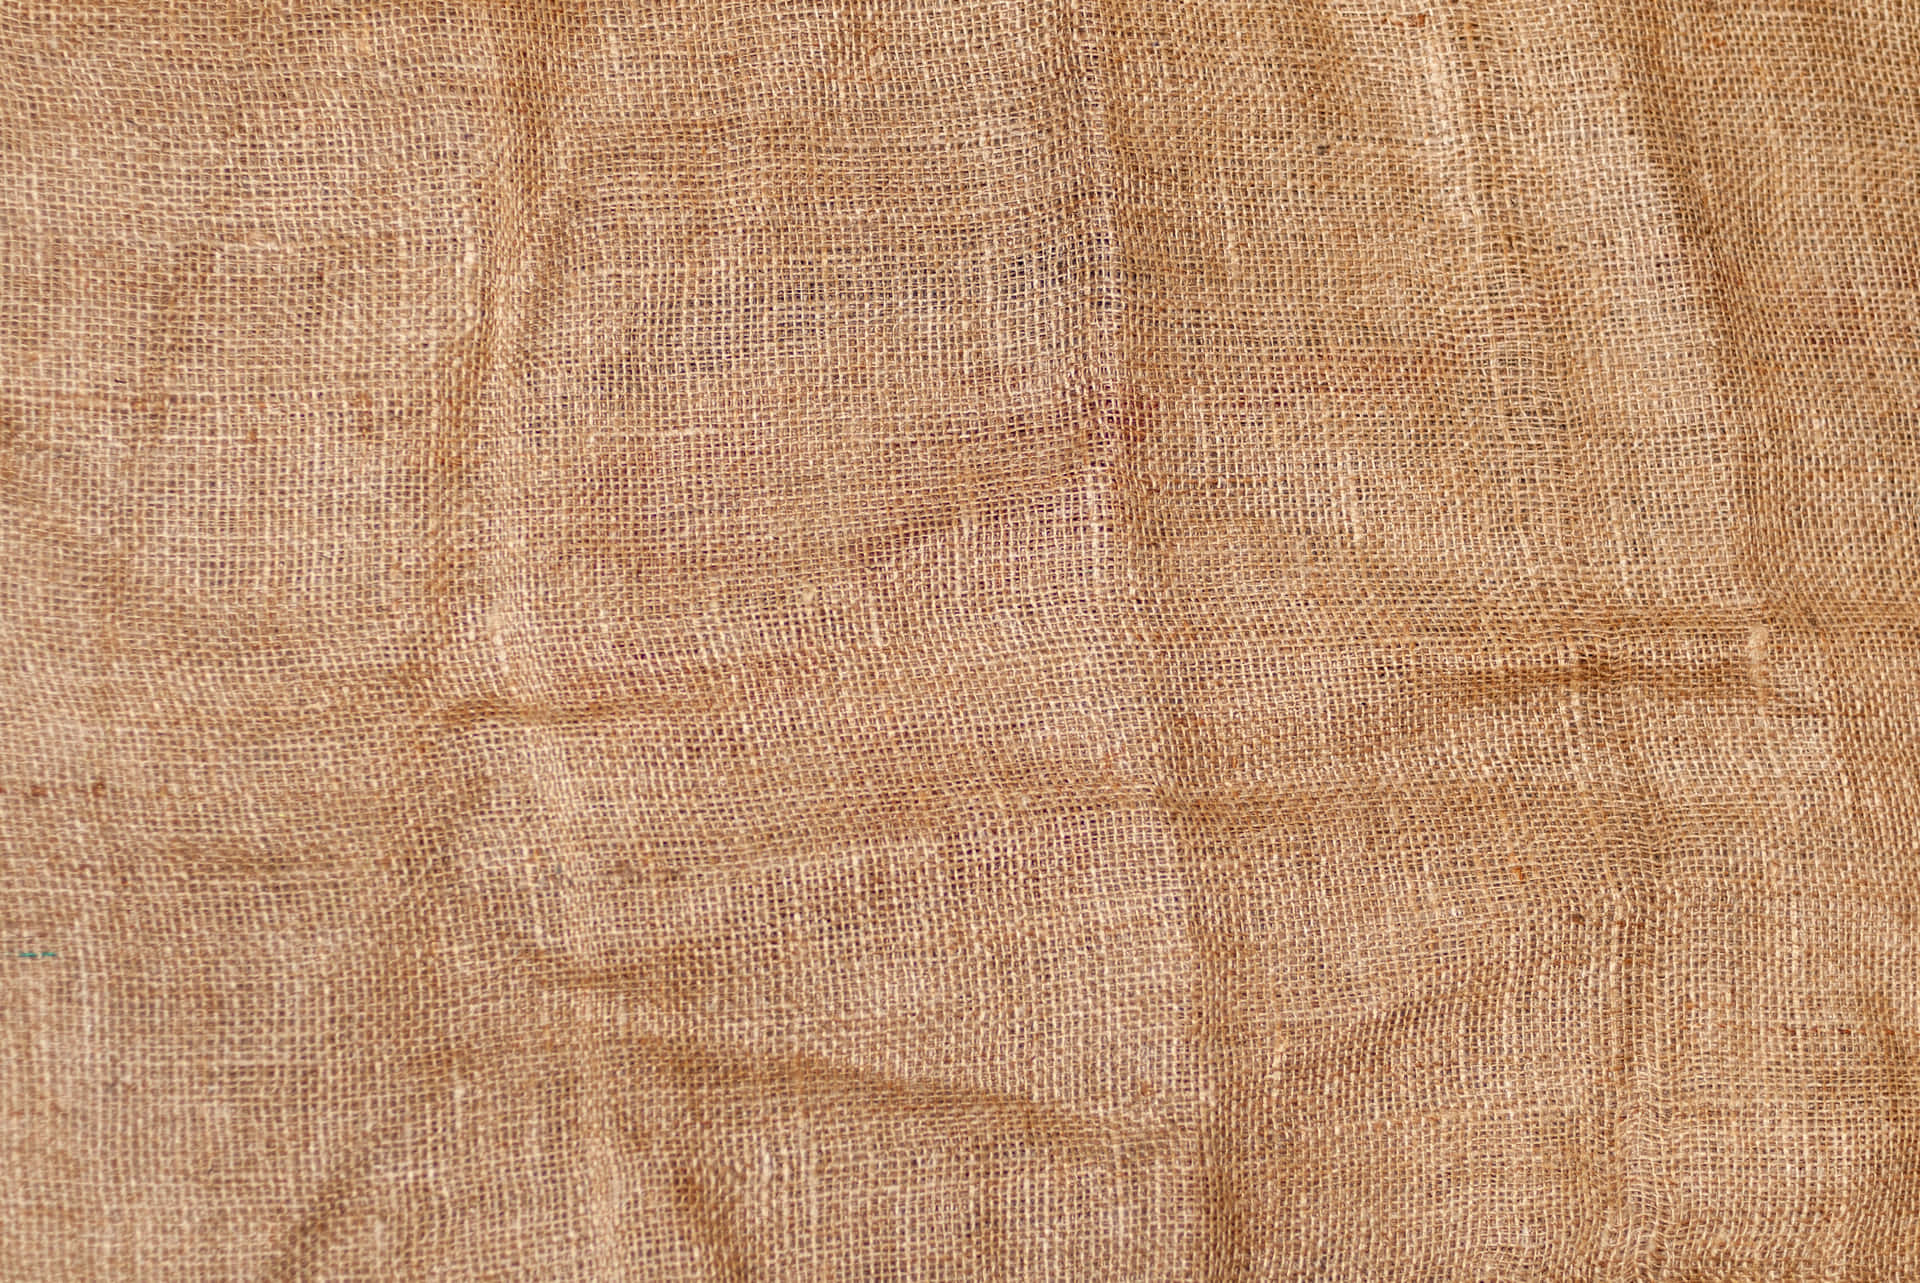 Subtle texture of burlap for a modern background